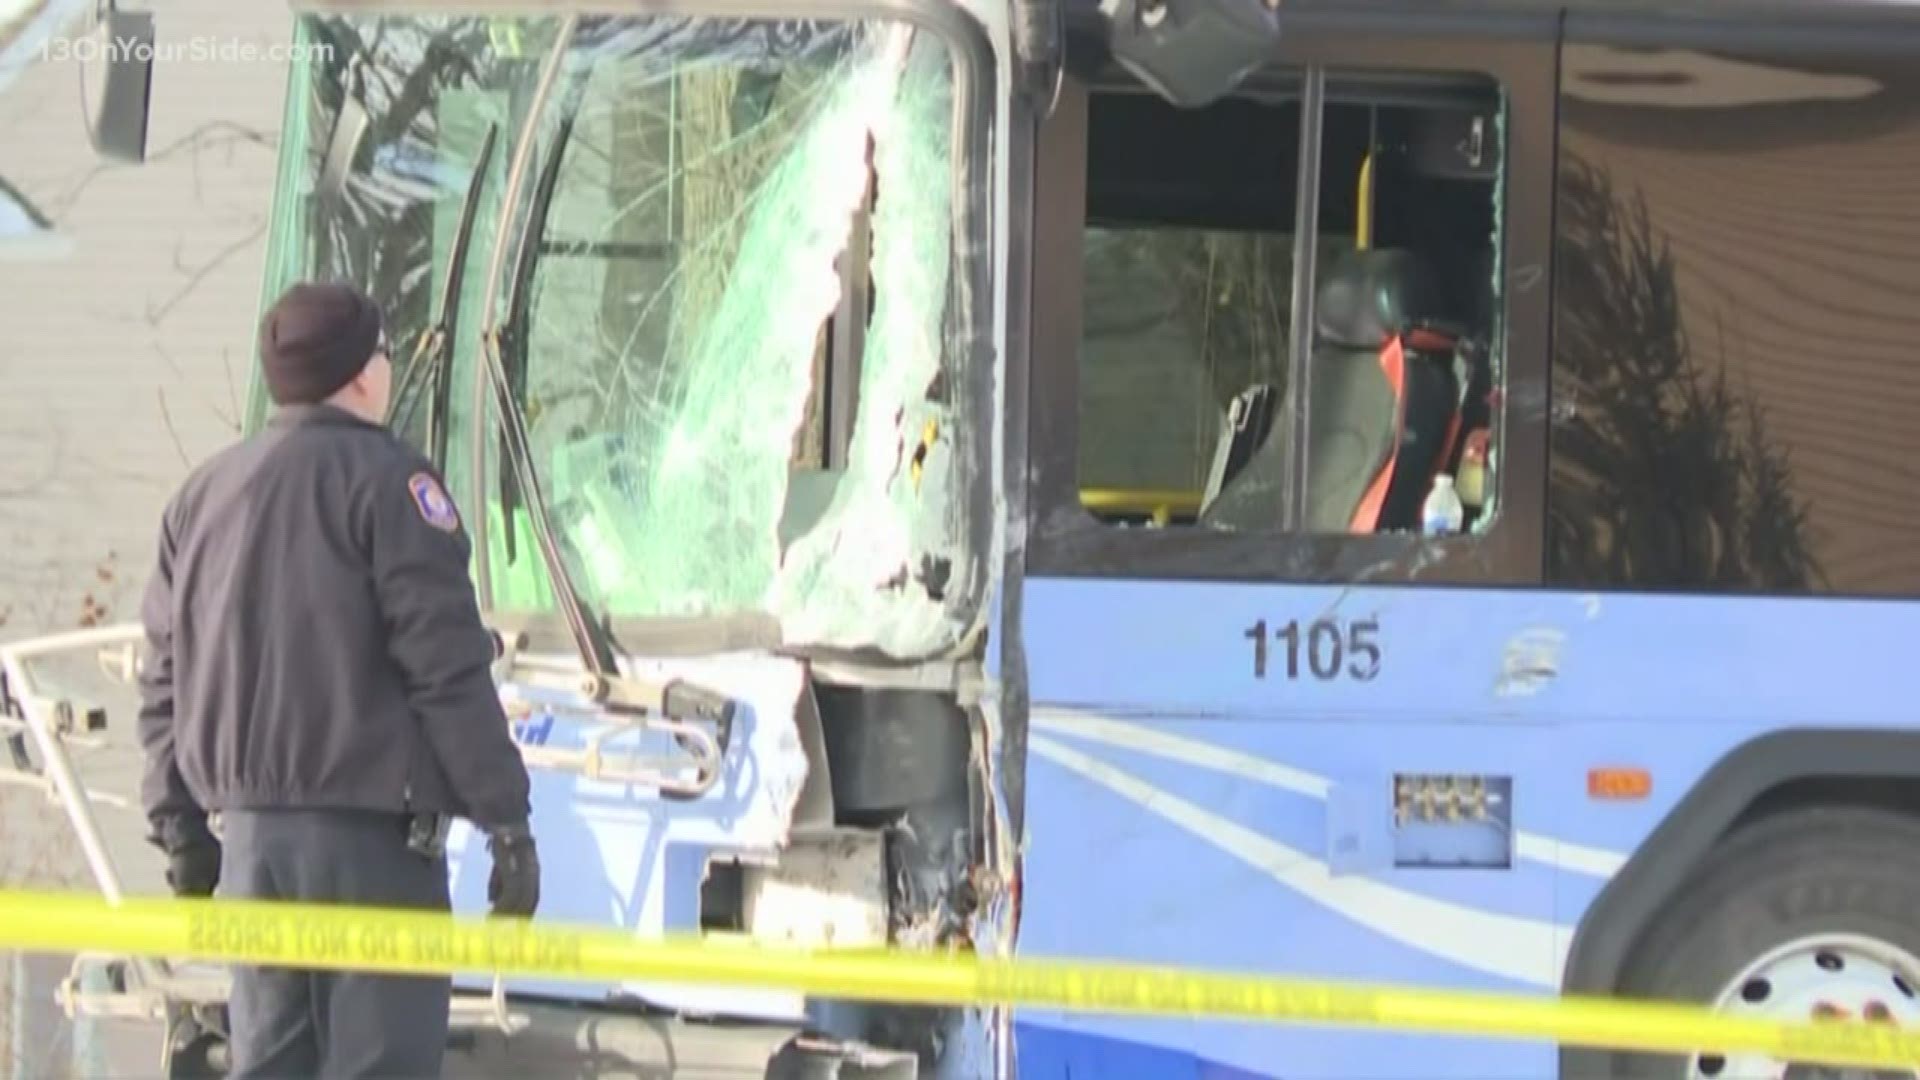 Authorities have identified the 27-year-old woman killed in a two-car crash involving a Rapid bus Wednesday morning.